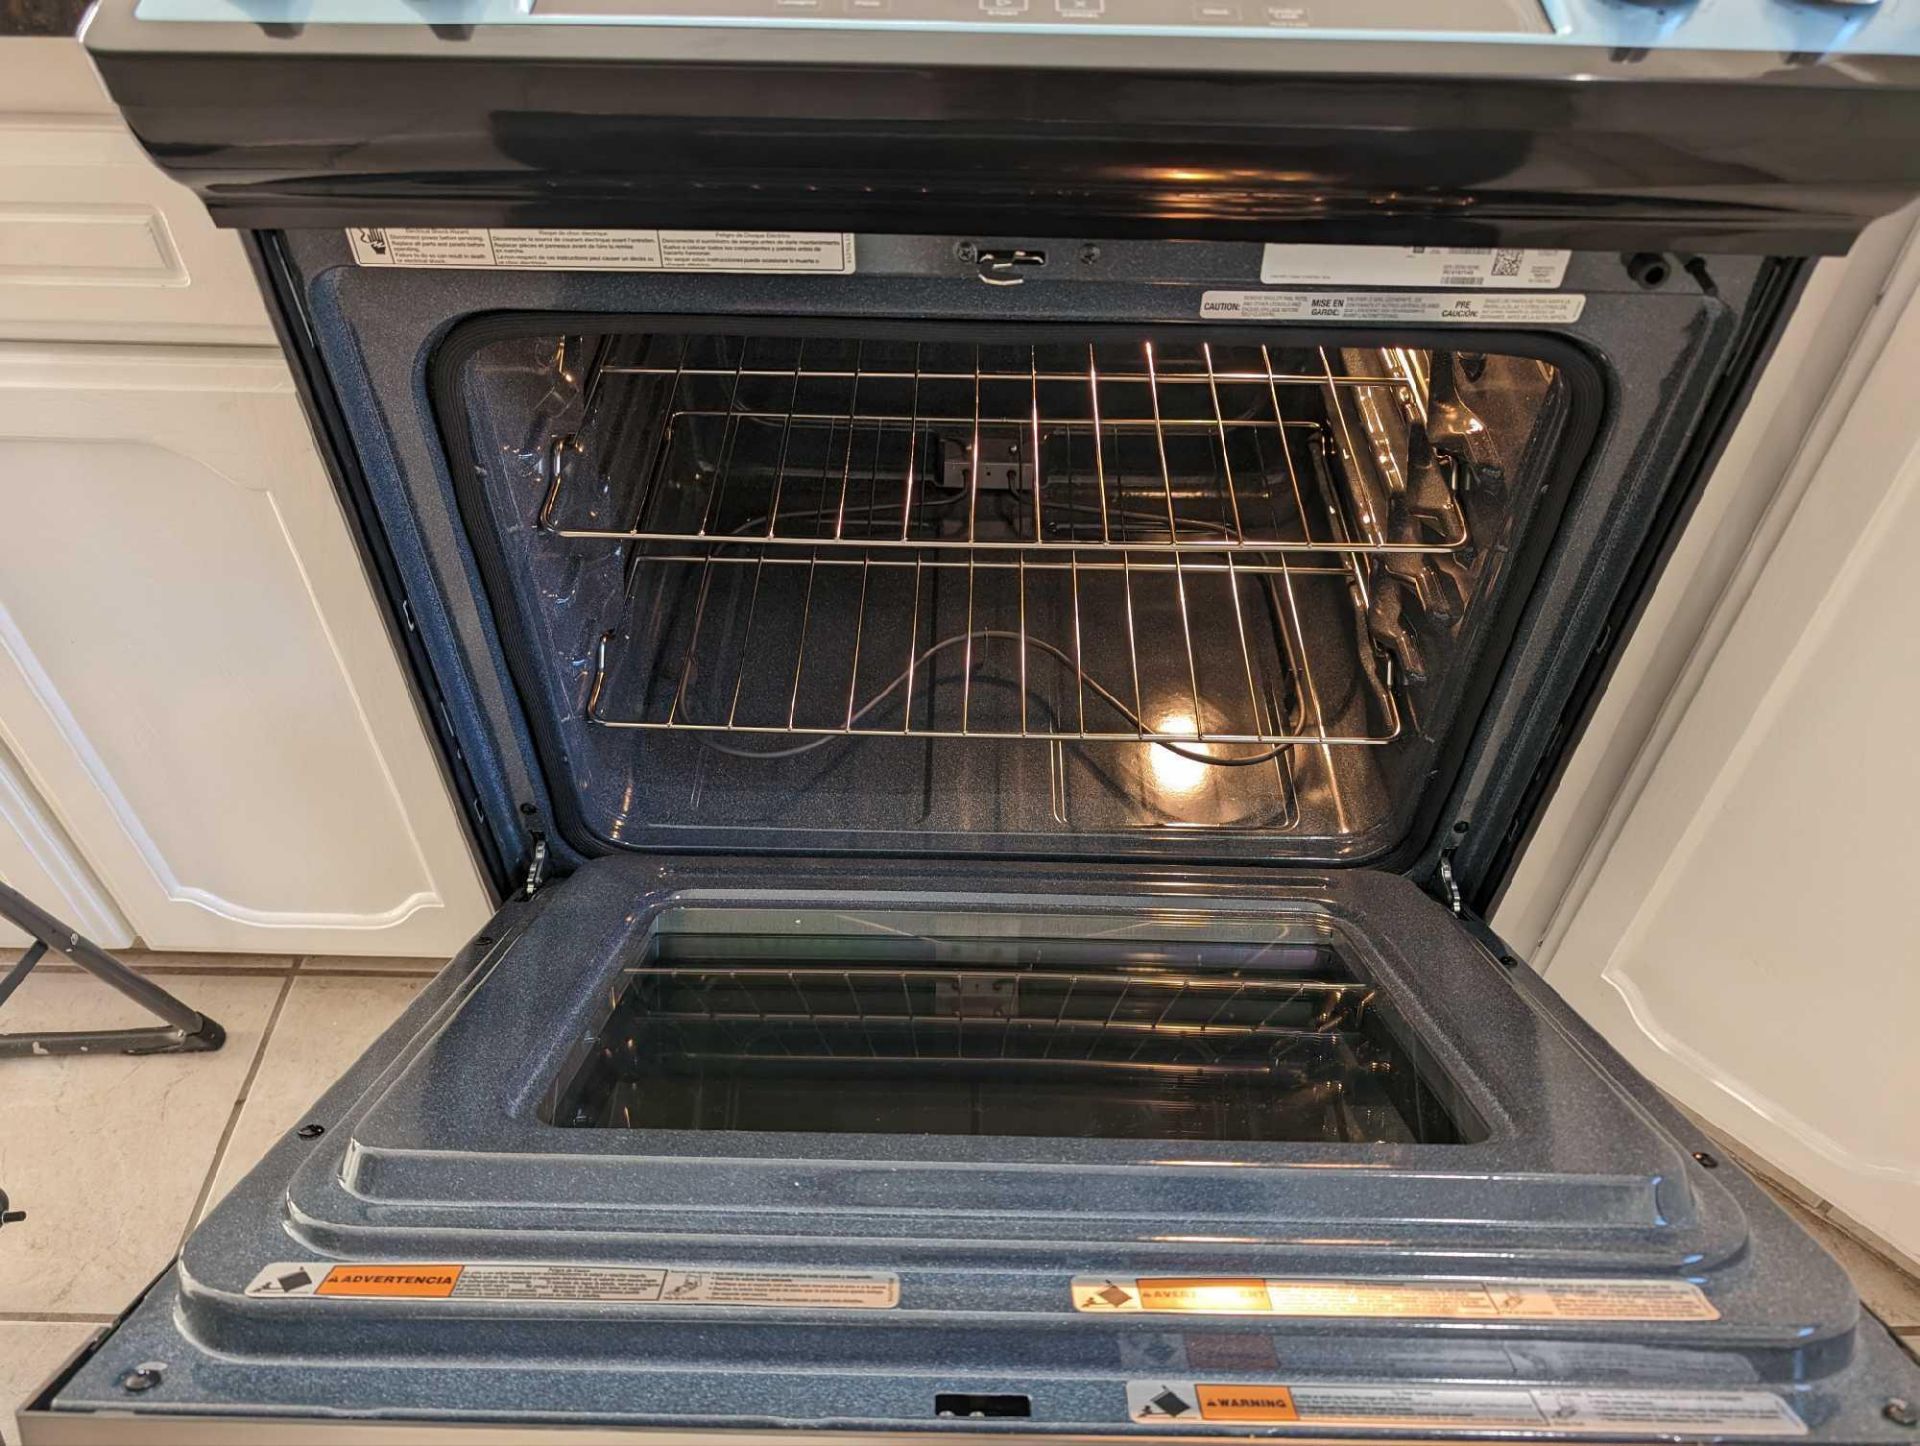 Whirlpool Model: wee515sols2  30" 4.8 Cu. ft Electric Range in Stainless Steel.  (Oven is new has ne - Image 4 of 9